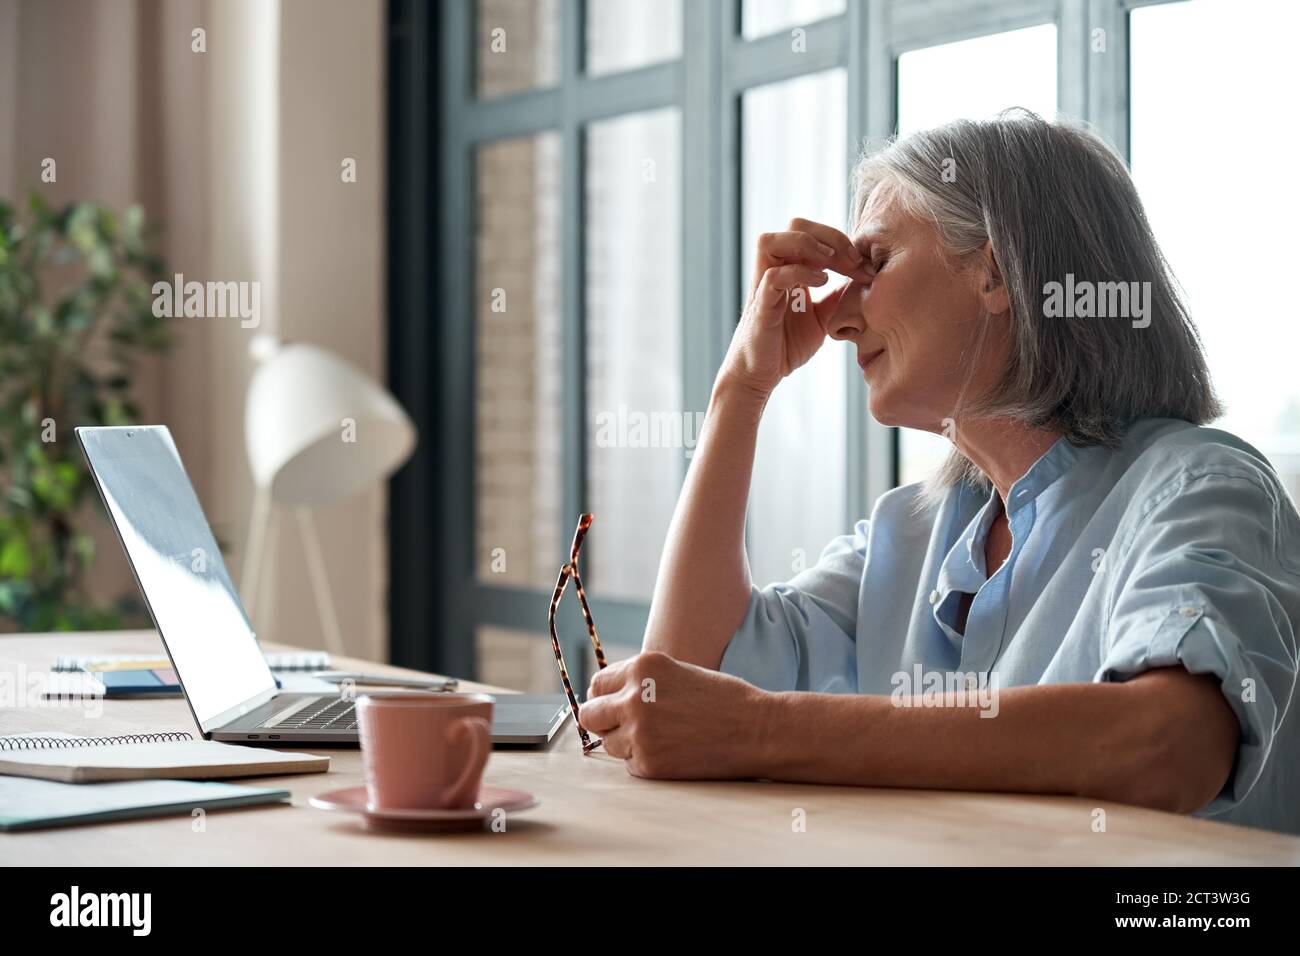 Tired old business woman takes off glasses feeling eye strain from computer. Stock Photo